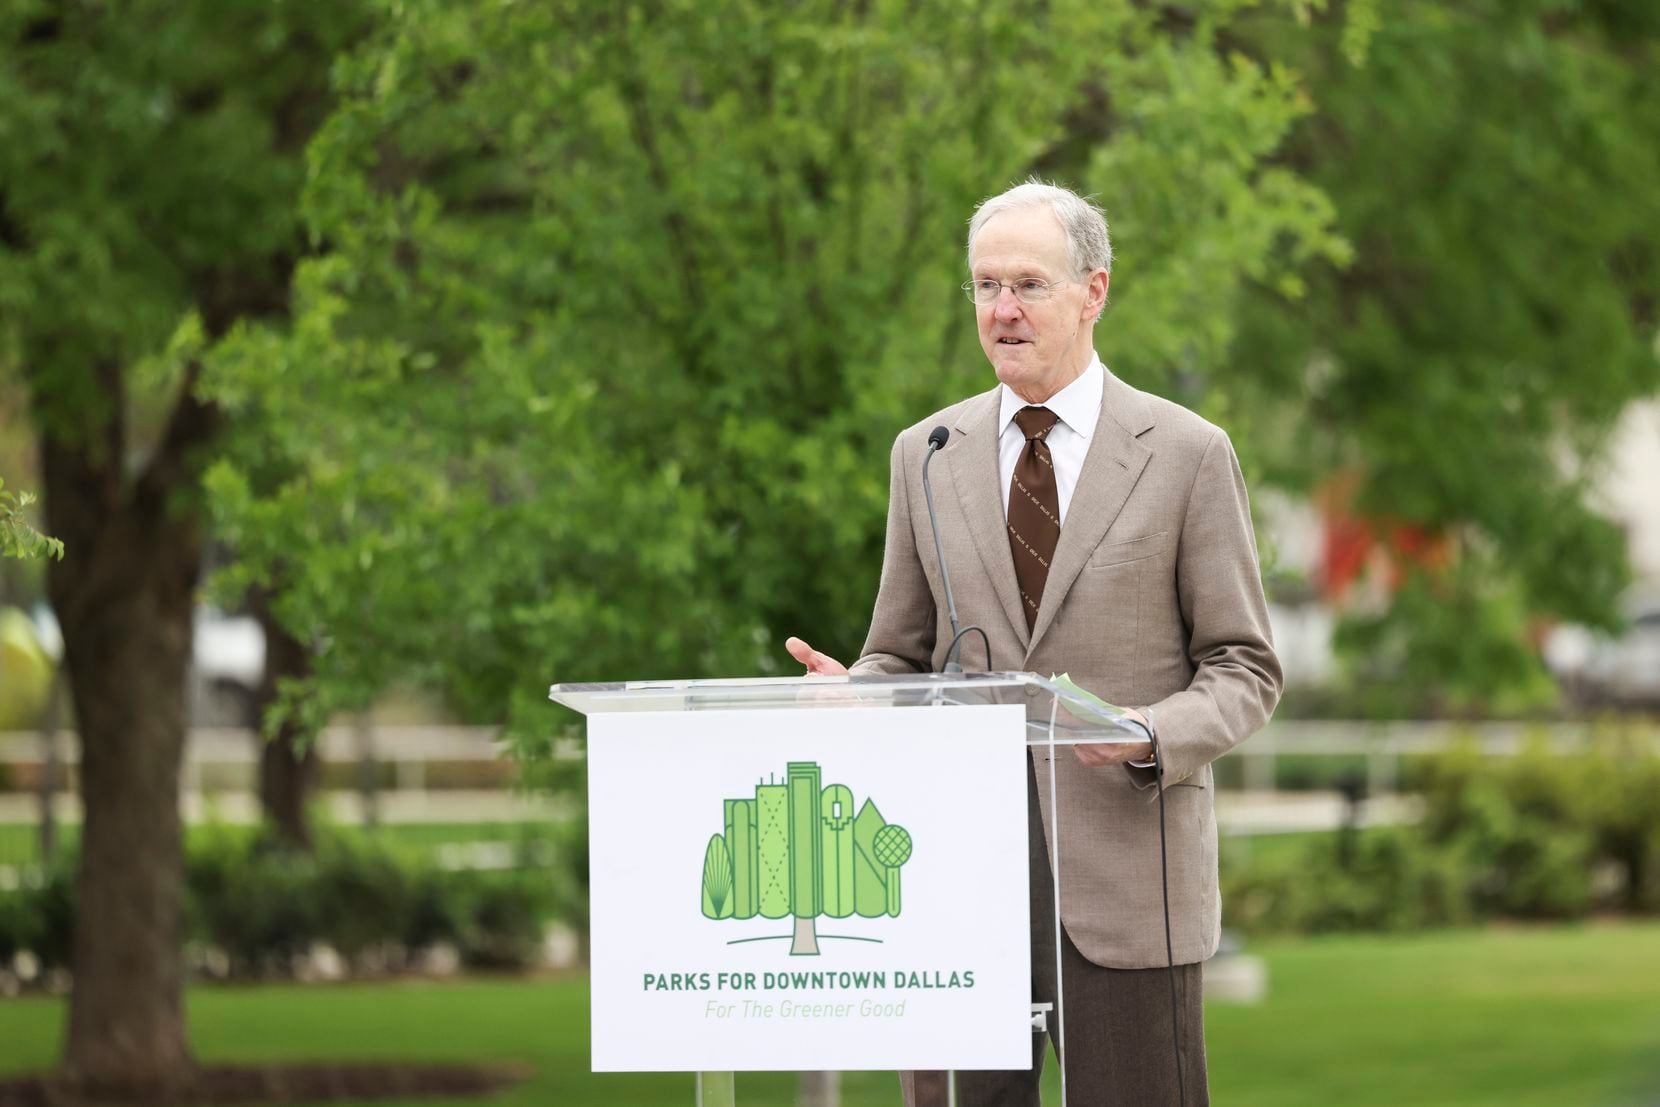 Robert Decherd, the founder of Parks for Downtown Dallas, thanked the Carpenter family for...